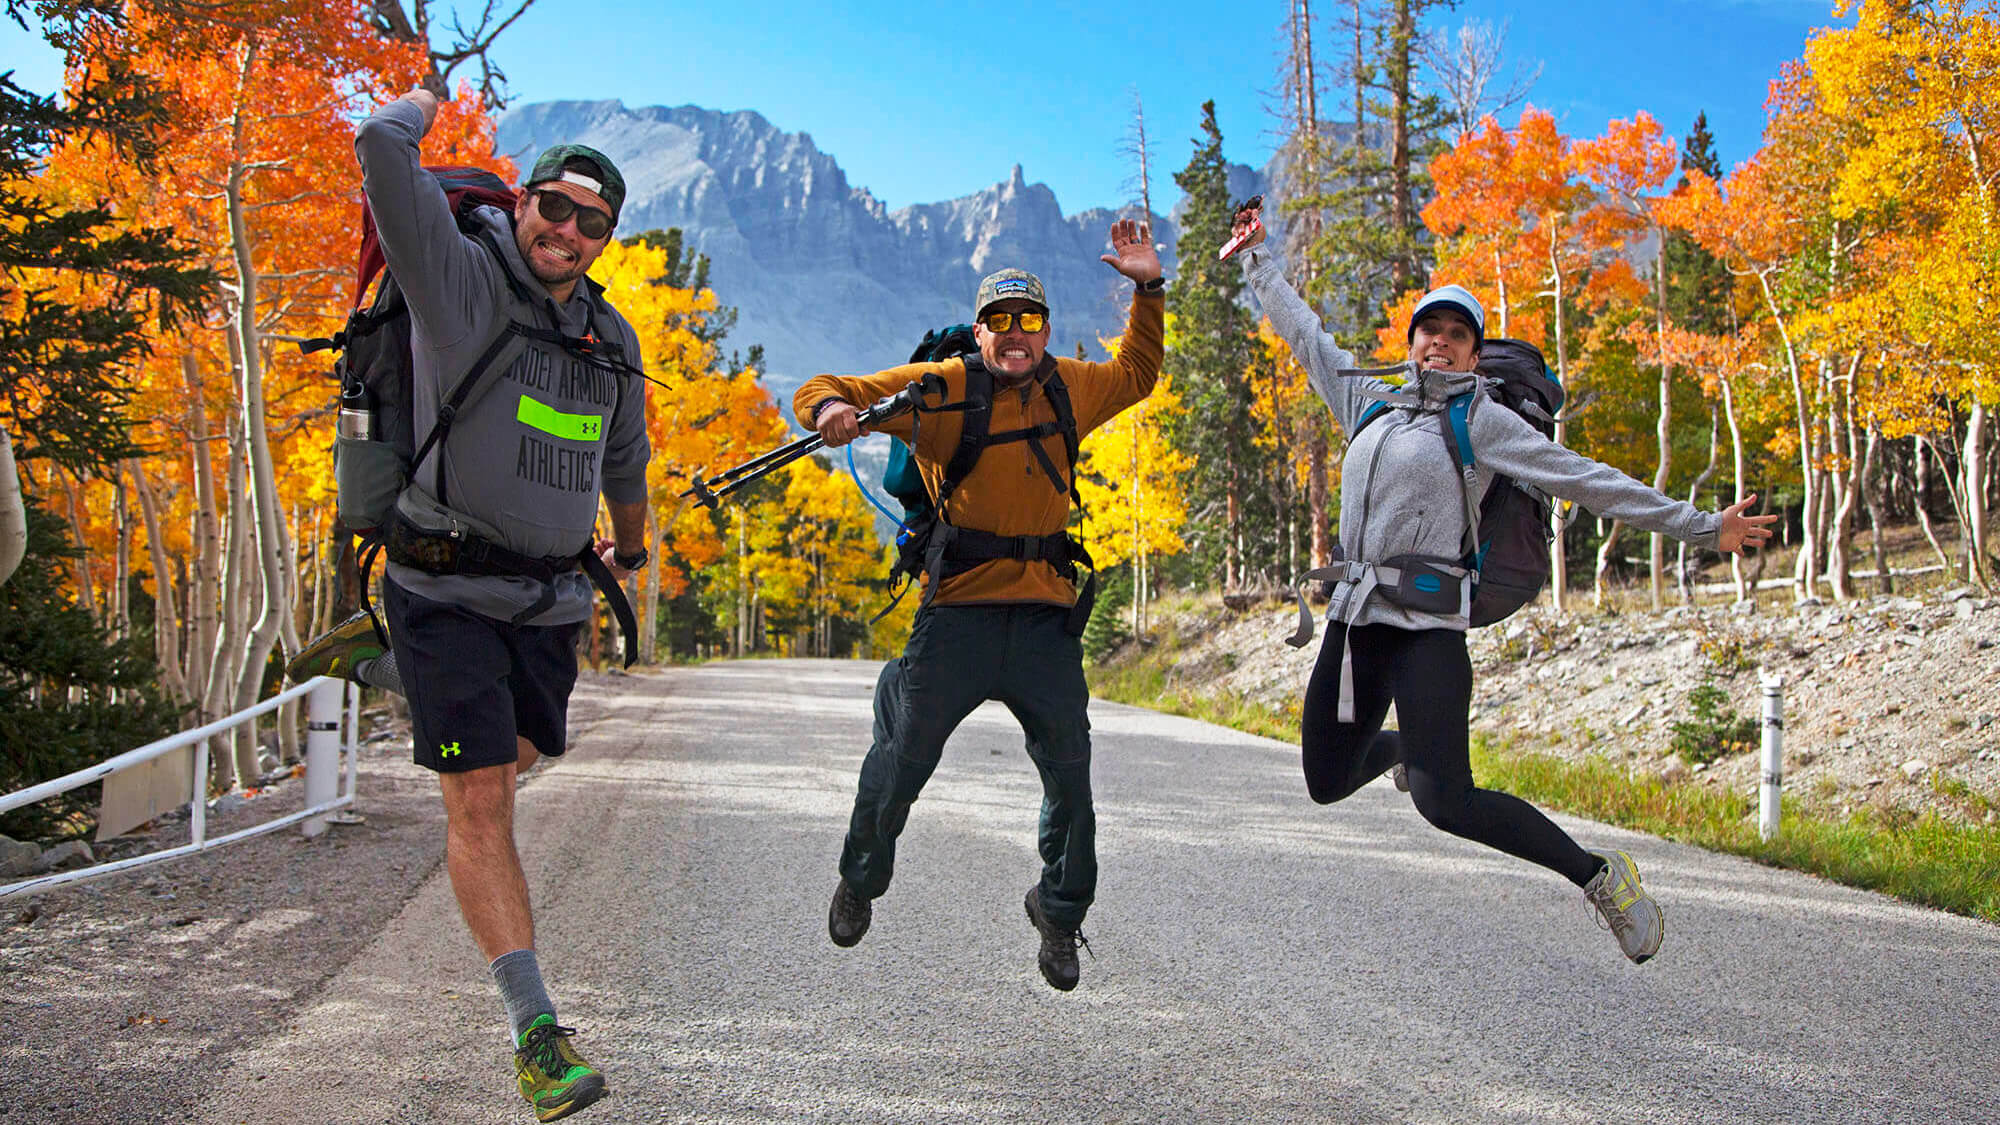 12 Reasons A Trip to Great Basin National Park is the Actual Worst